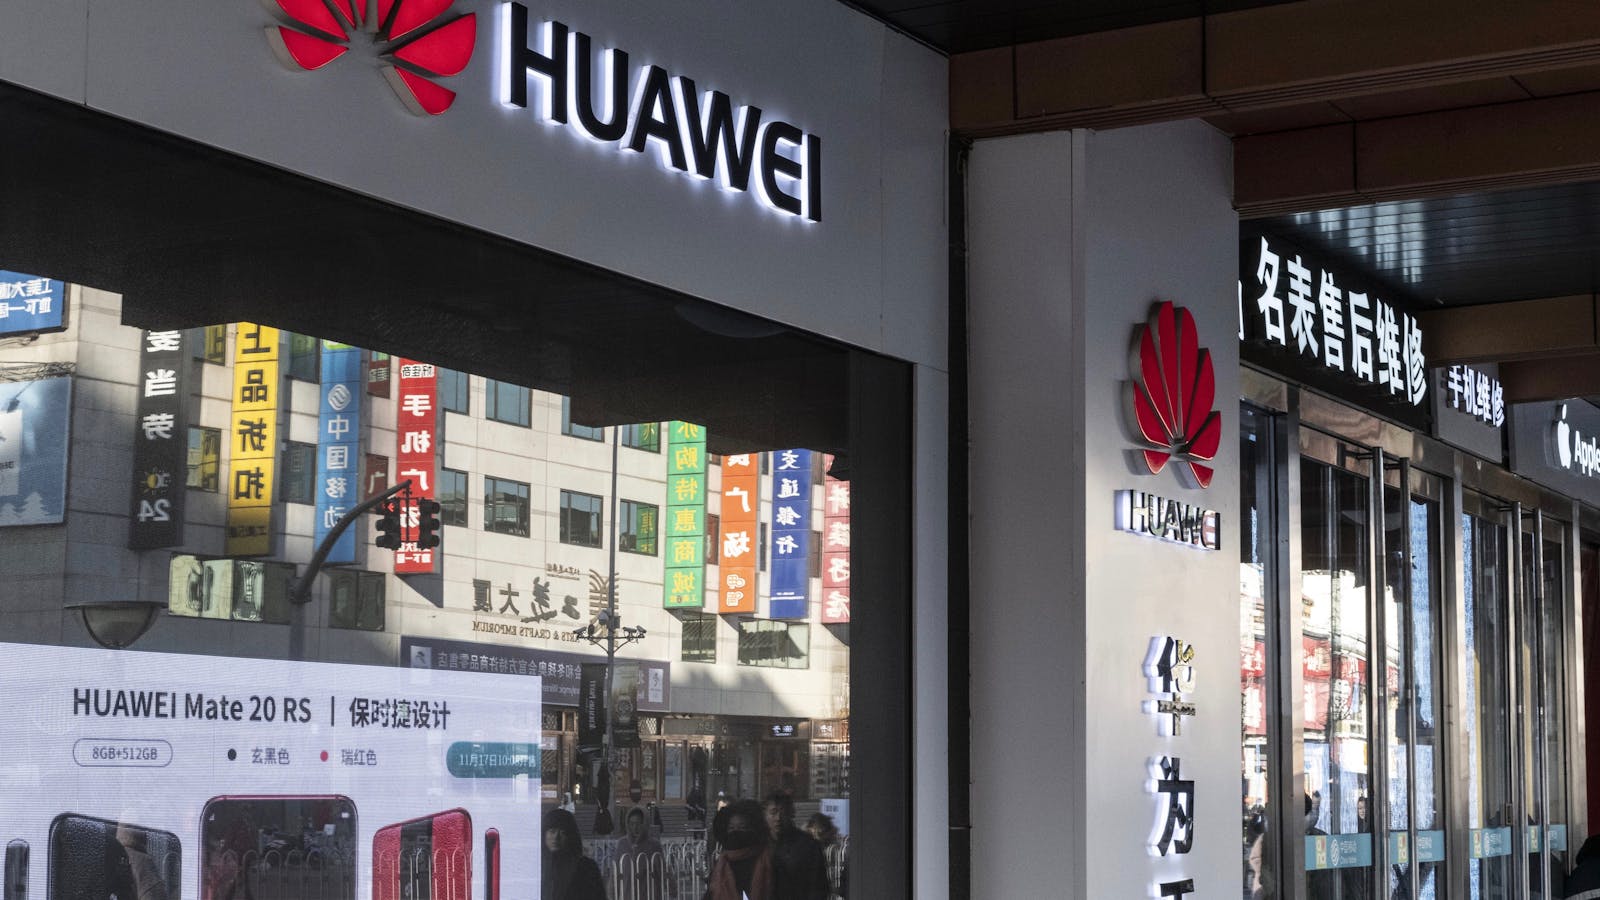 Huawei ads in Beijing. Photo by Bloomberg